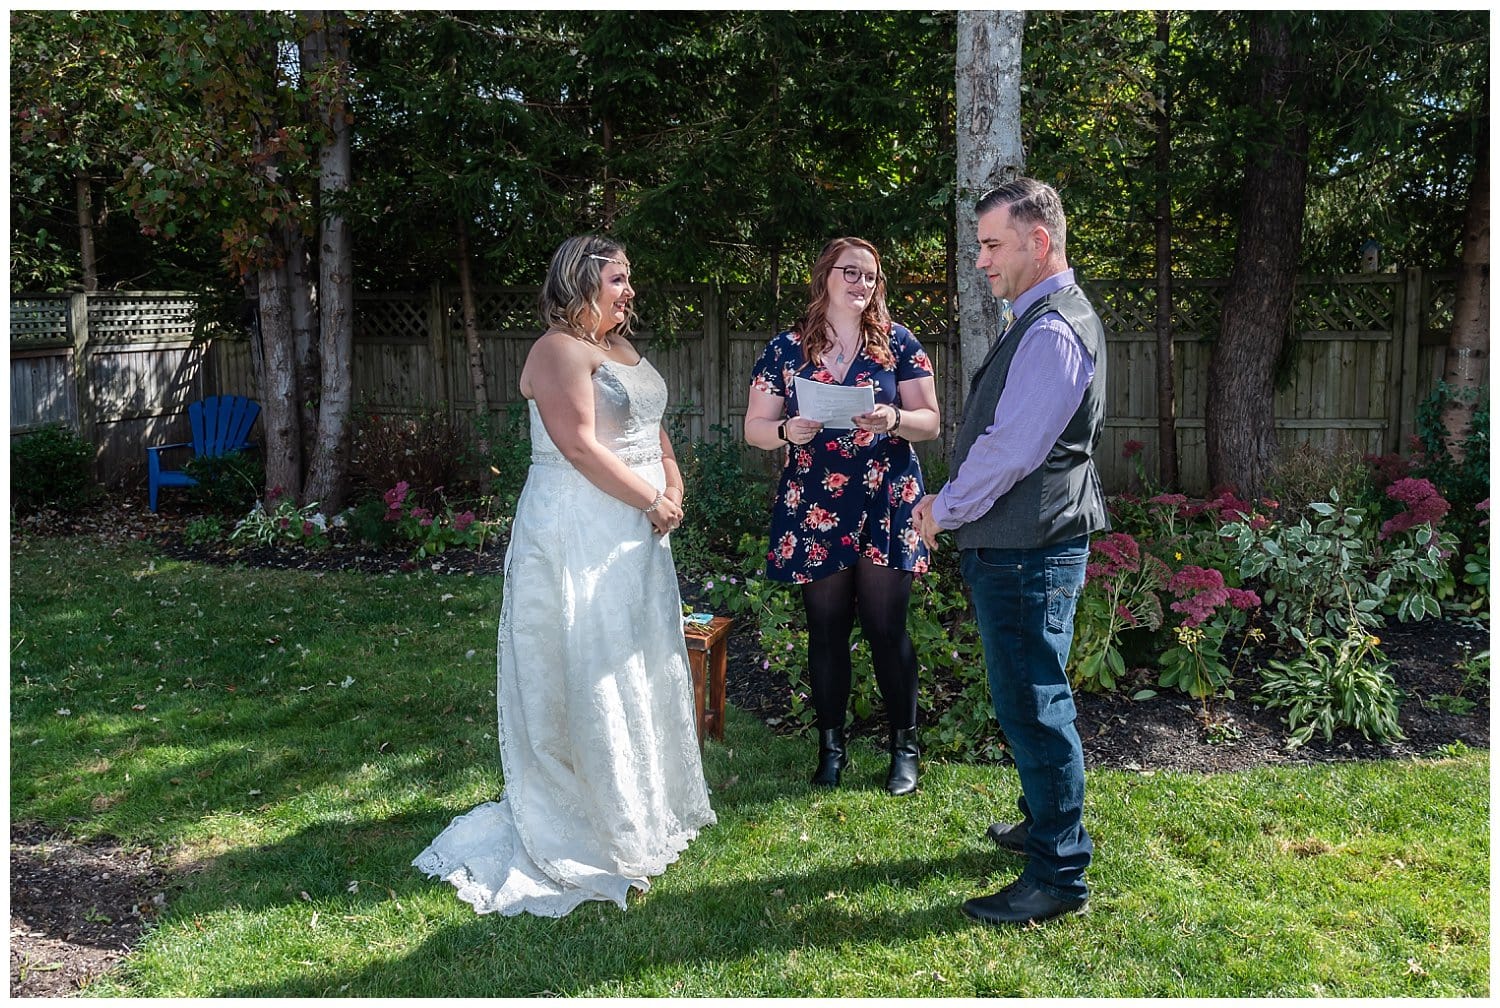 The bride and groom gaze on each other during their garden backyard wedding ceremony in Dartmouth NS.